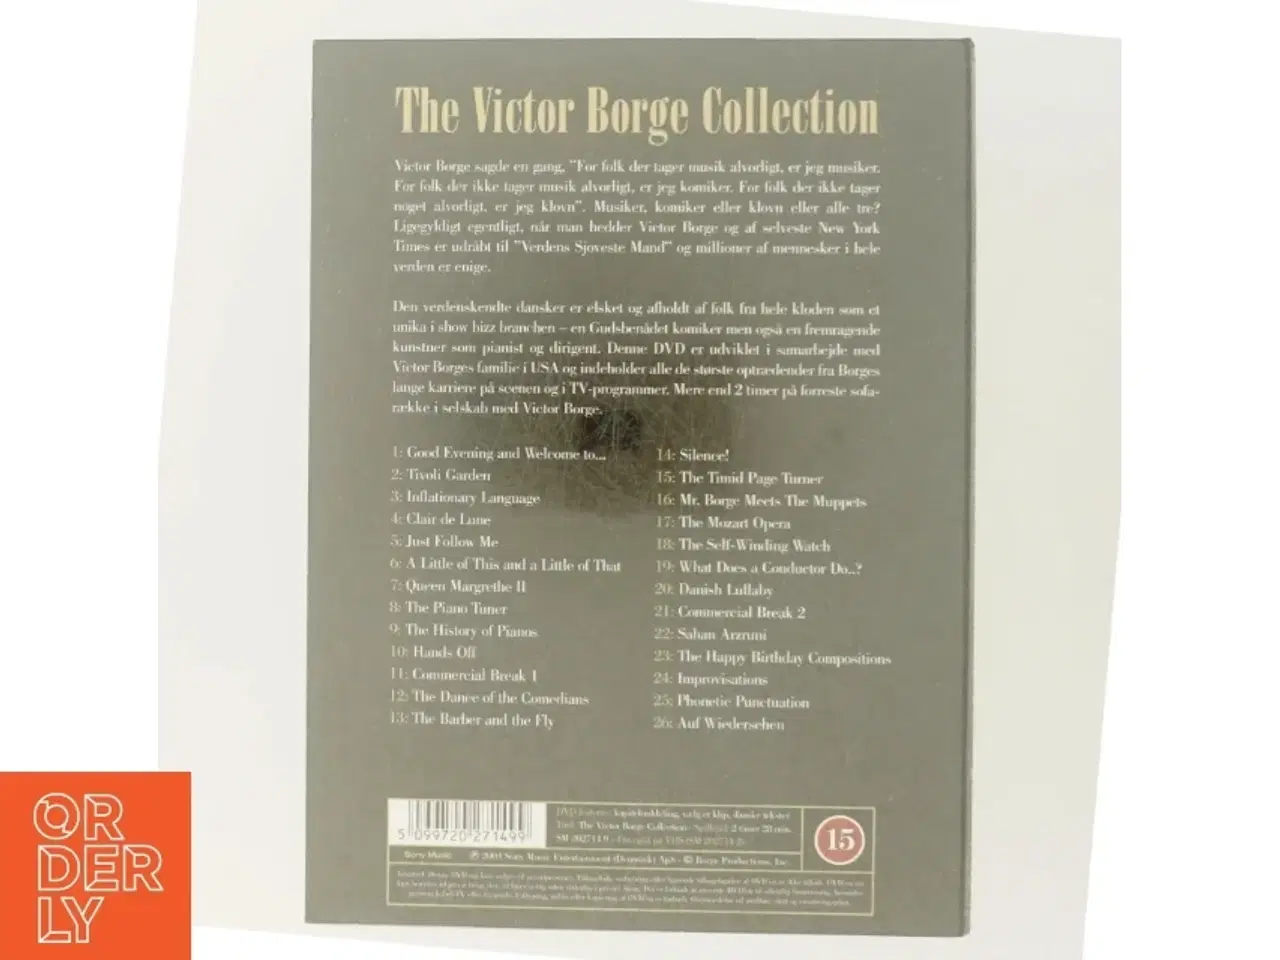 Billede 3 - The Victor Borge Collection